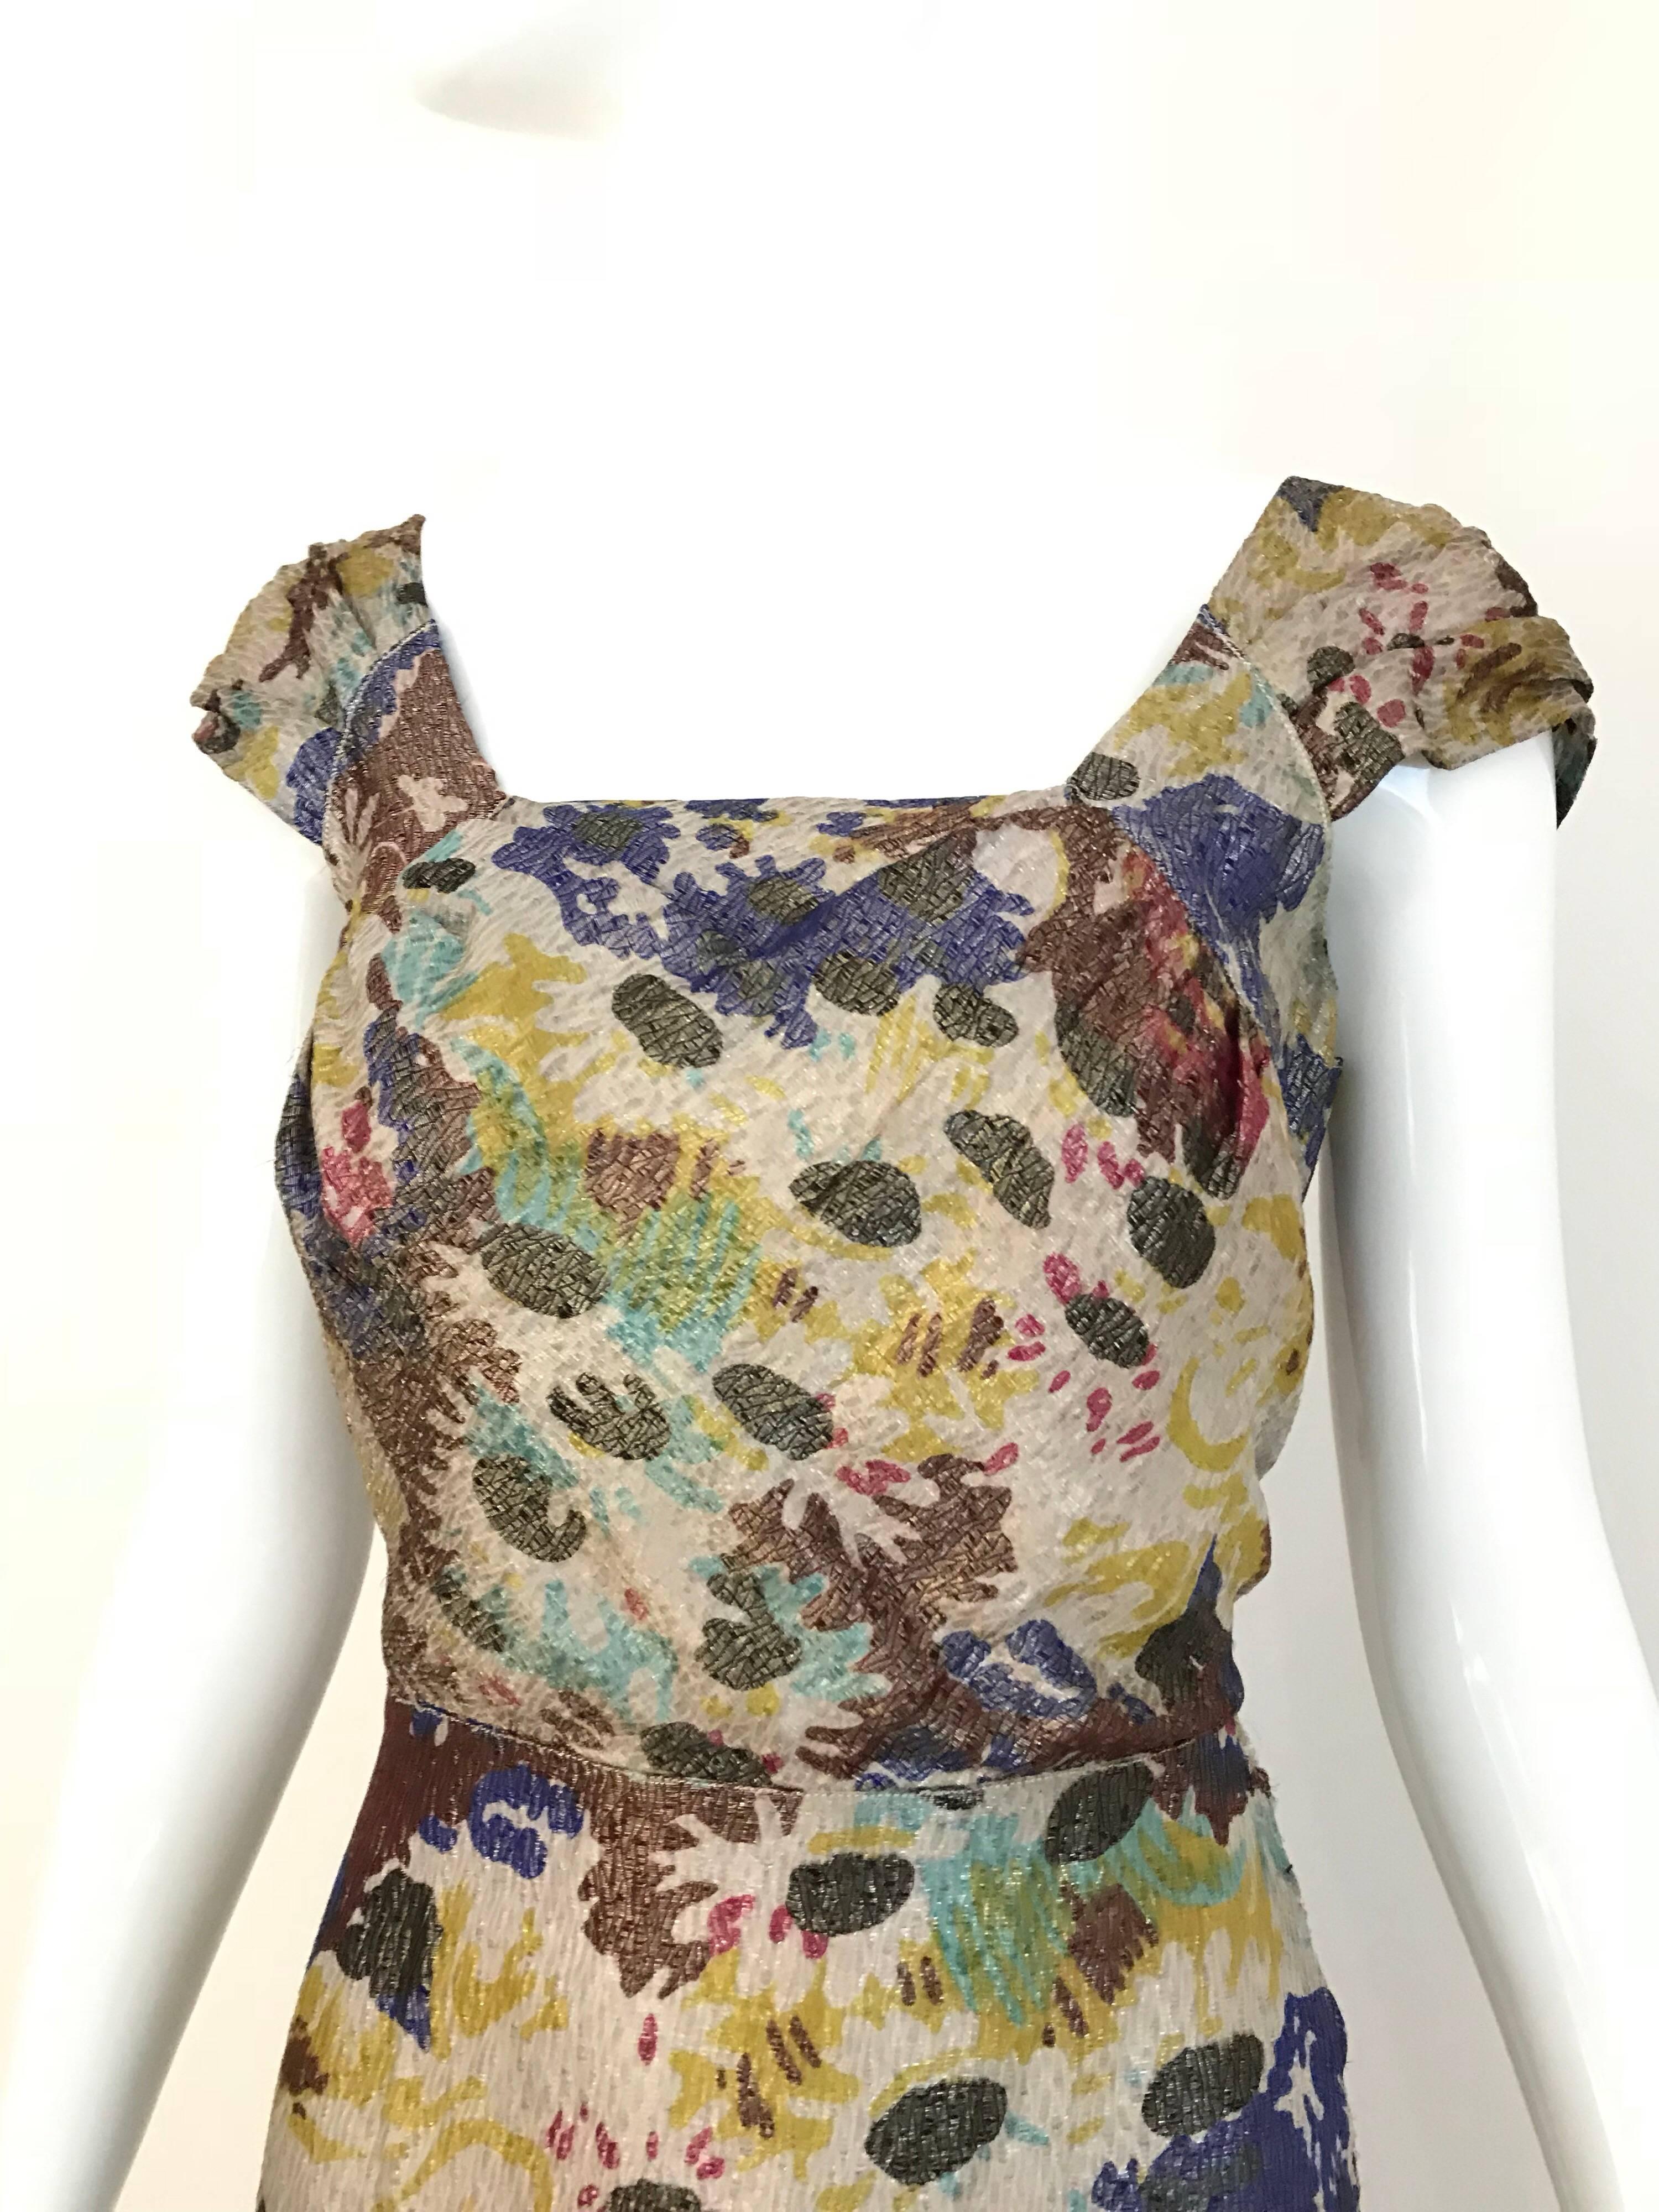 Elegant 1930s Silk lamé floral print in brown, mauve, blue, yellow and green.  Dress has cap sleeves with V shape exposure.  Dress has snap on button on the side. 
Perfect for downton abbey summer cocktail party.  Size: 4/6
Bust: 34 / W 27/ H 36” /